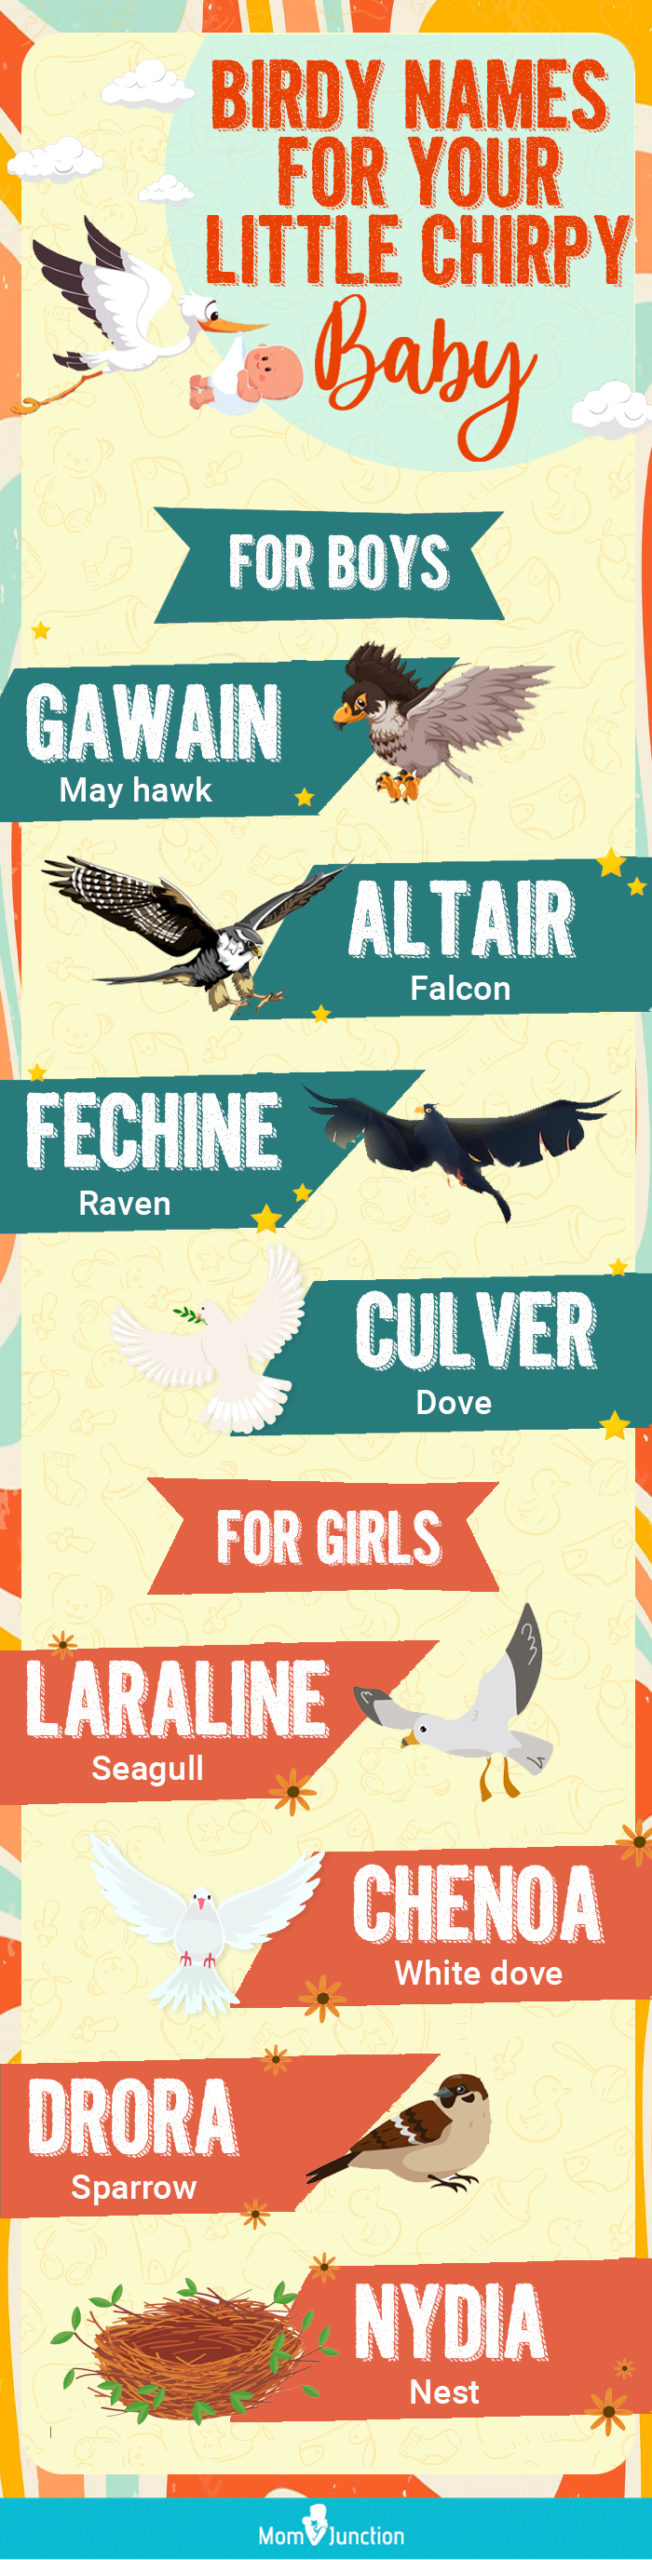 birdy names for your little chirpy baby (infographic)